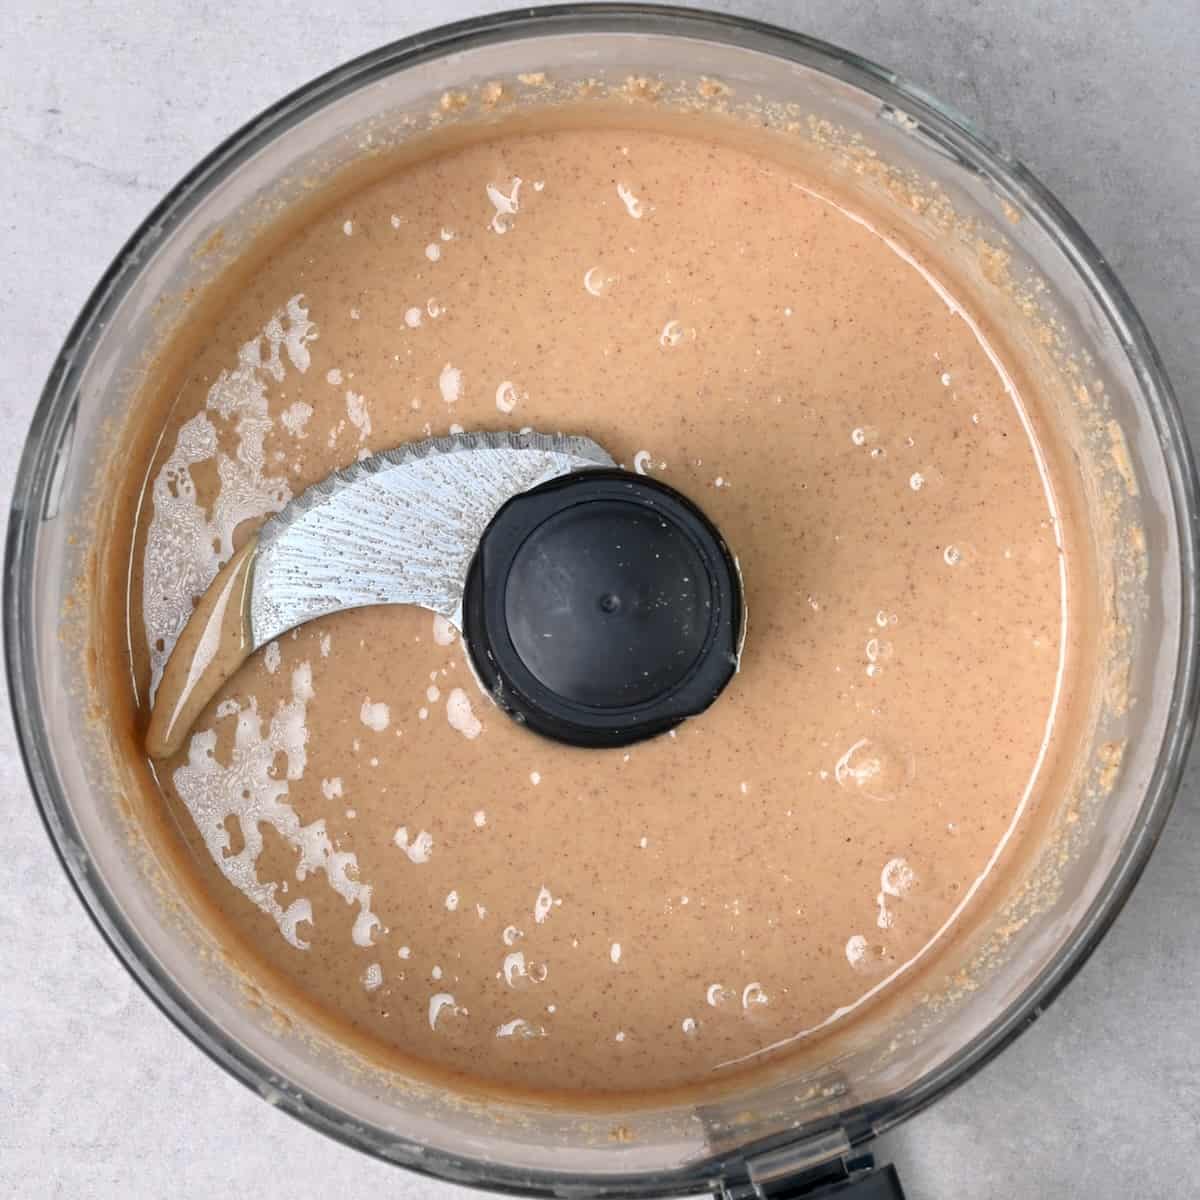 Homemade peanut butter in a food processor